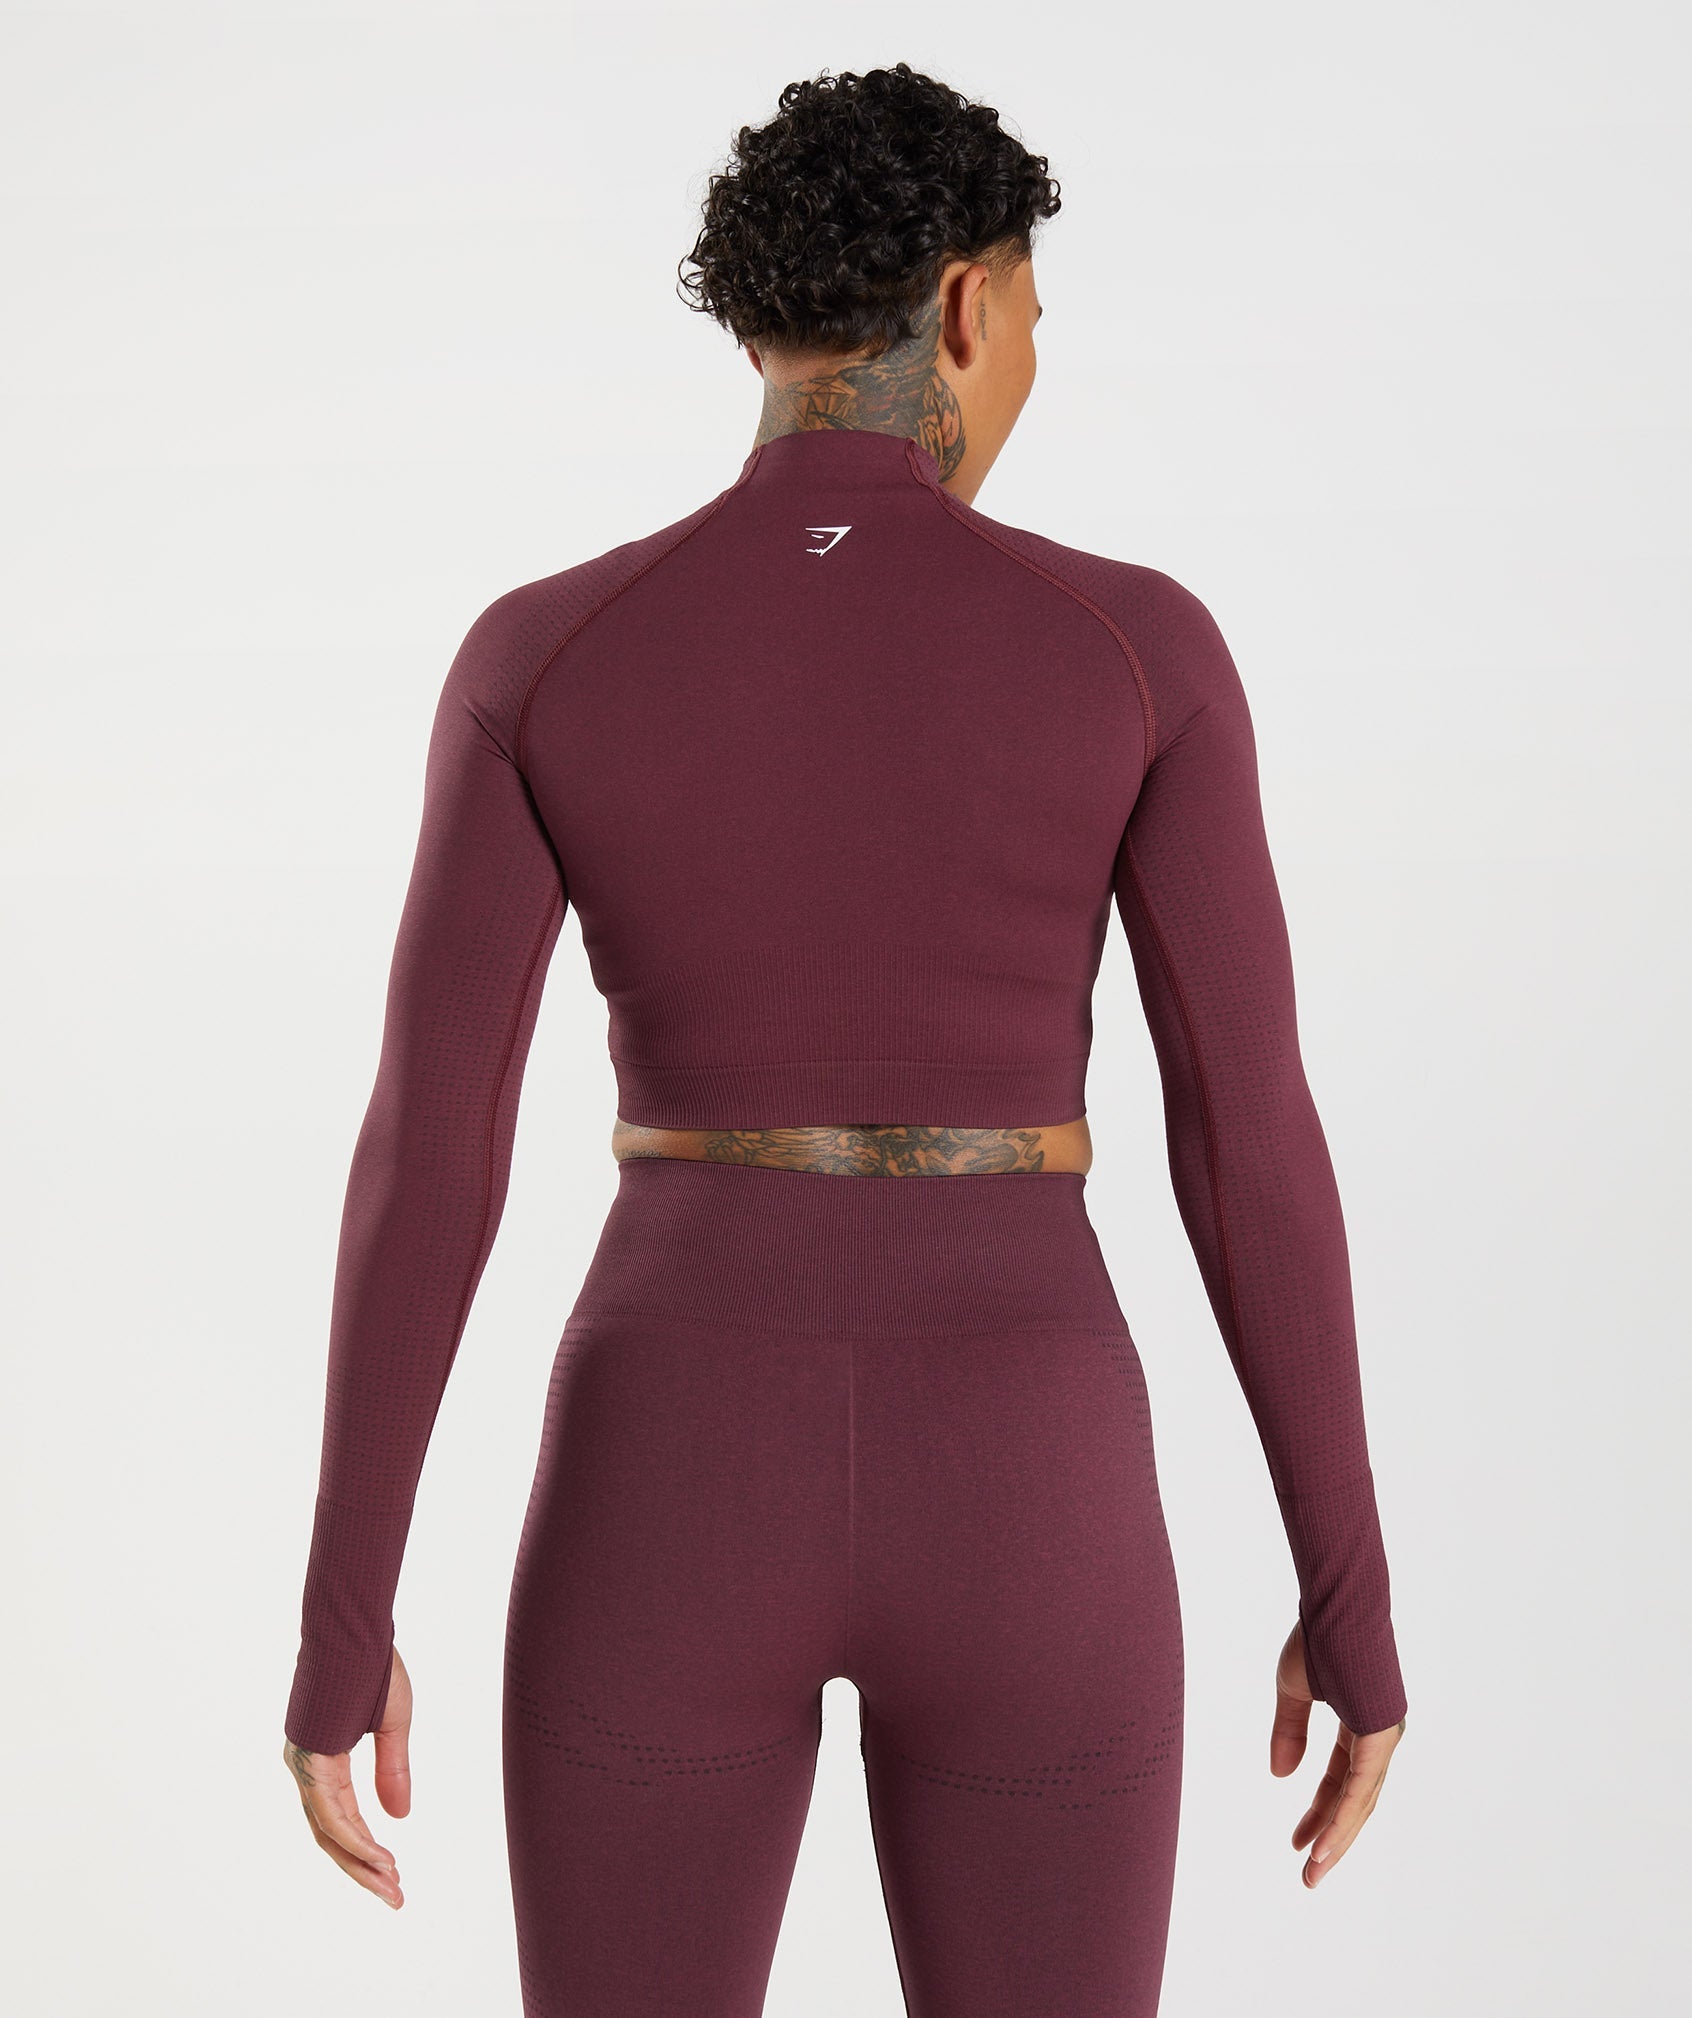 Vital Seamless 2.0 High Neck Midi Top in Baked Maroon Marl - view 2